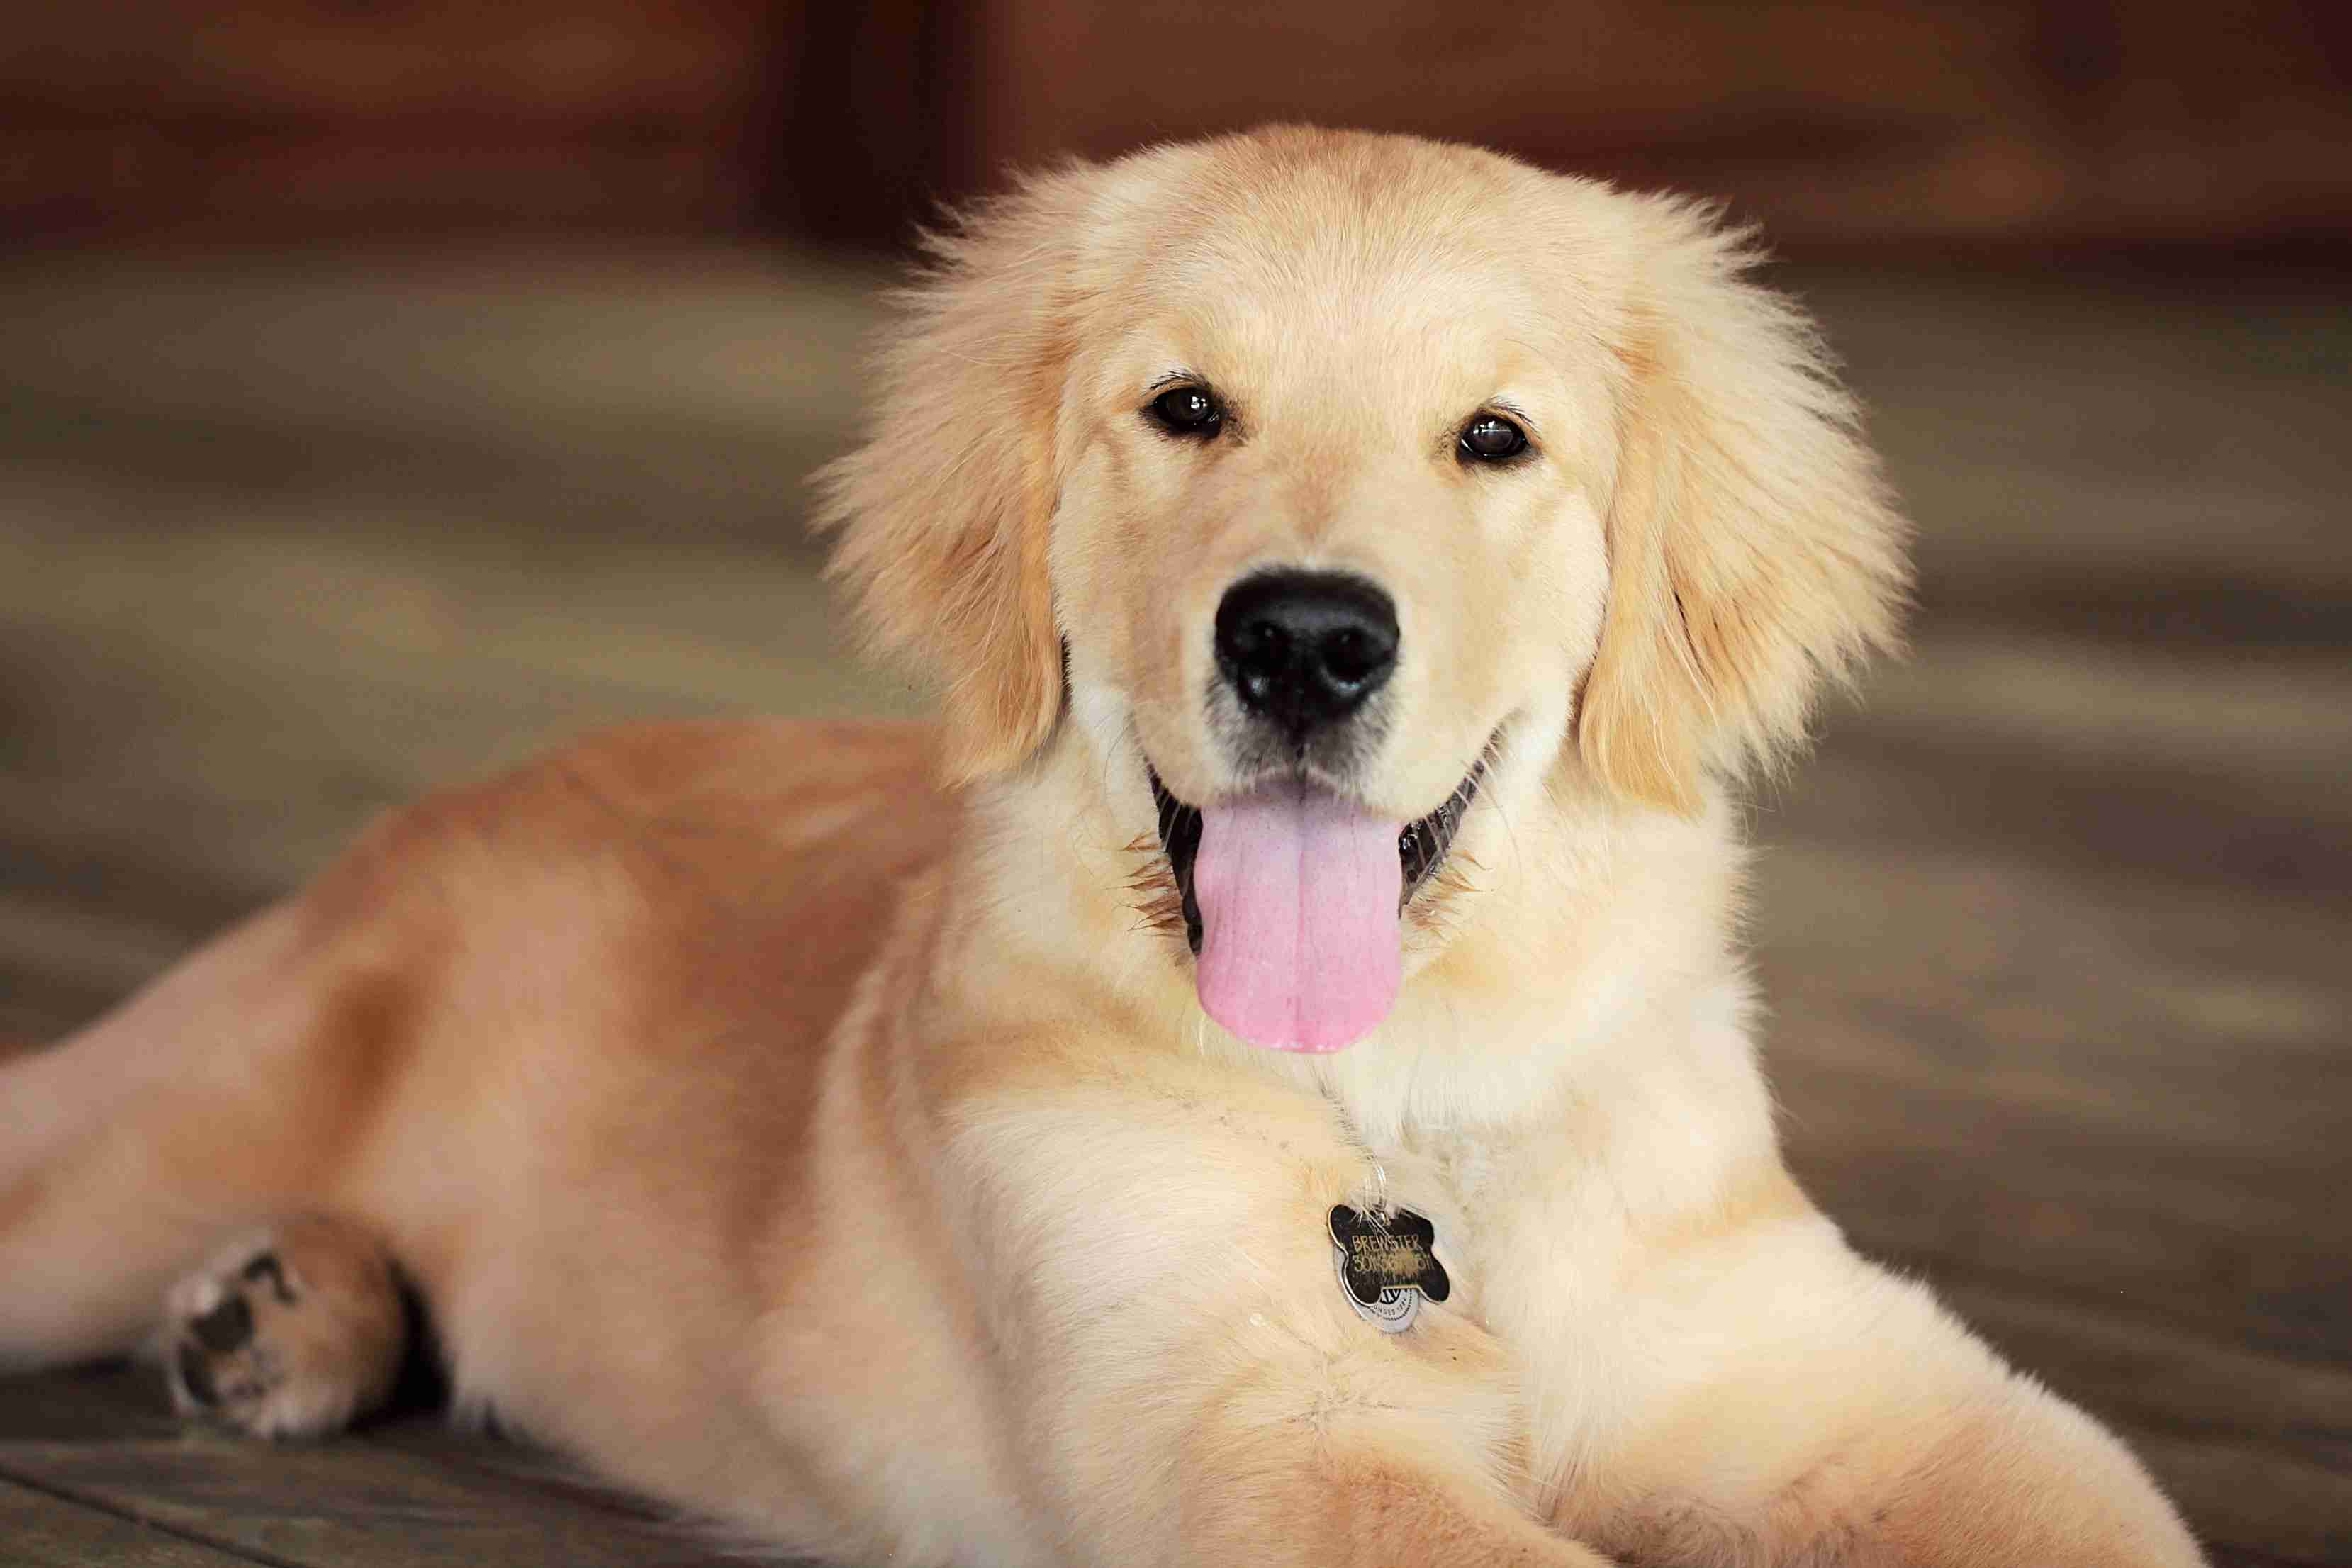 What are some signs of liver problems in Golden Retrievers?